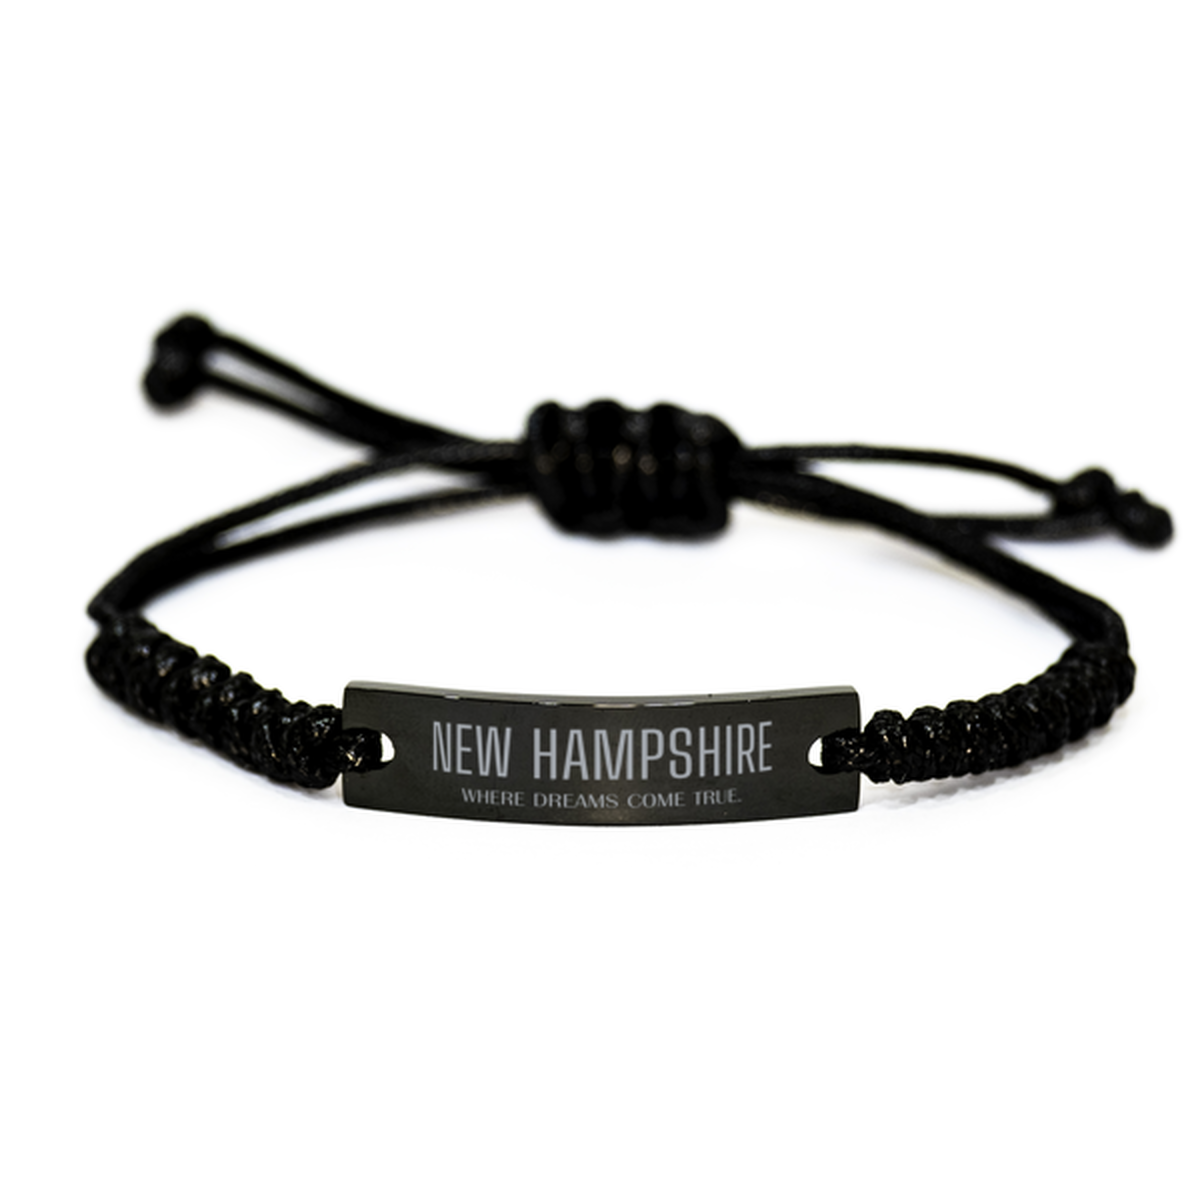 Love New Hampshire State Black Rope Bracelet, New Hampshire Where dreams come true, Birthday Inspirational Gifts For New Hampshire Men, Women, Friends